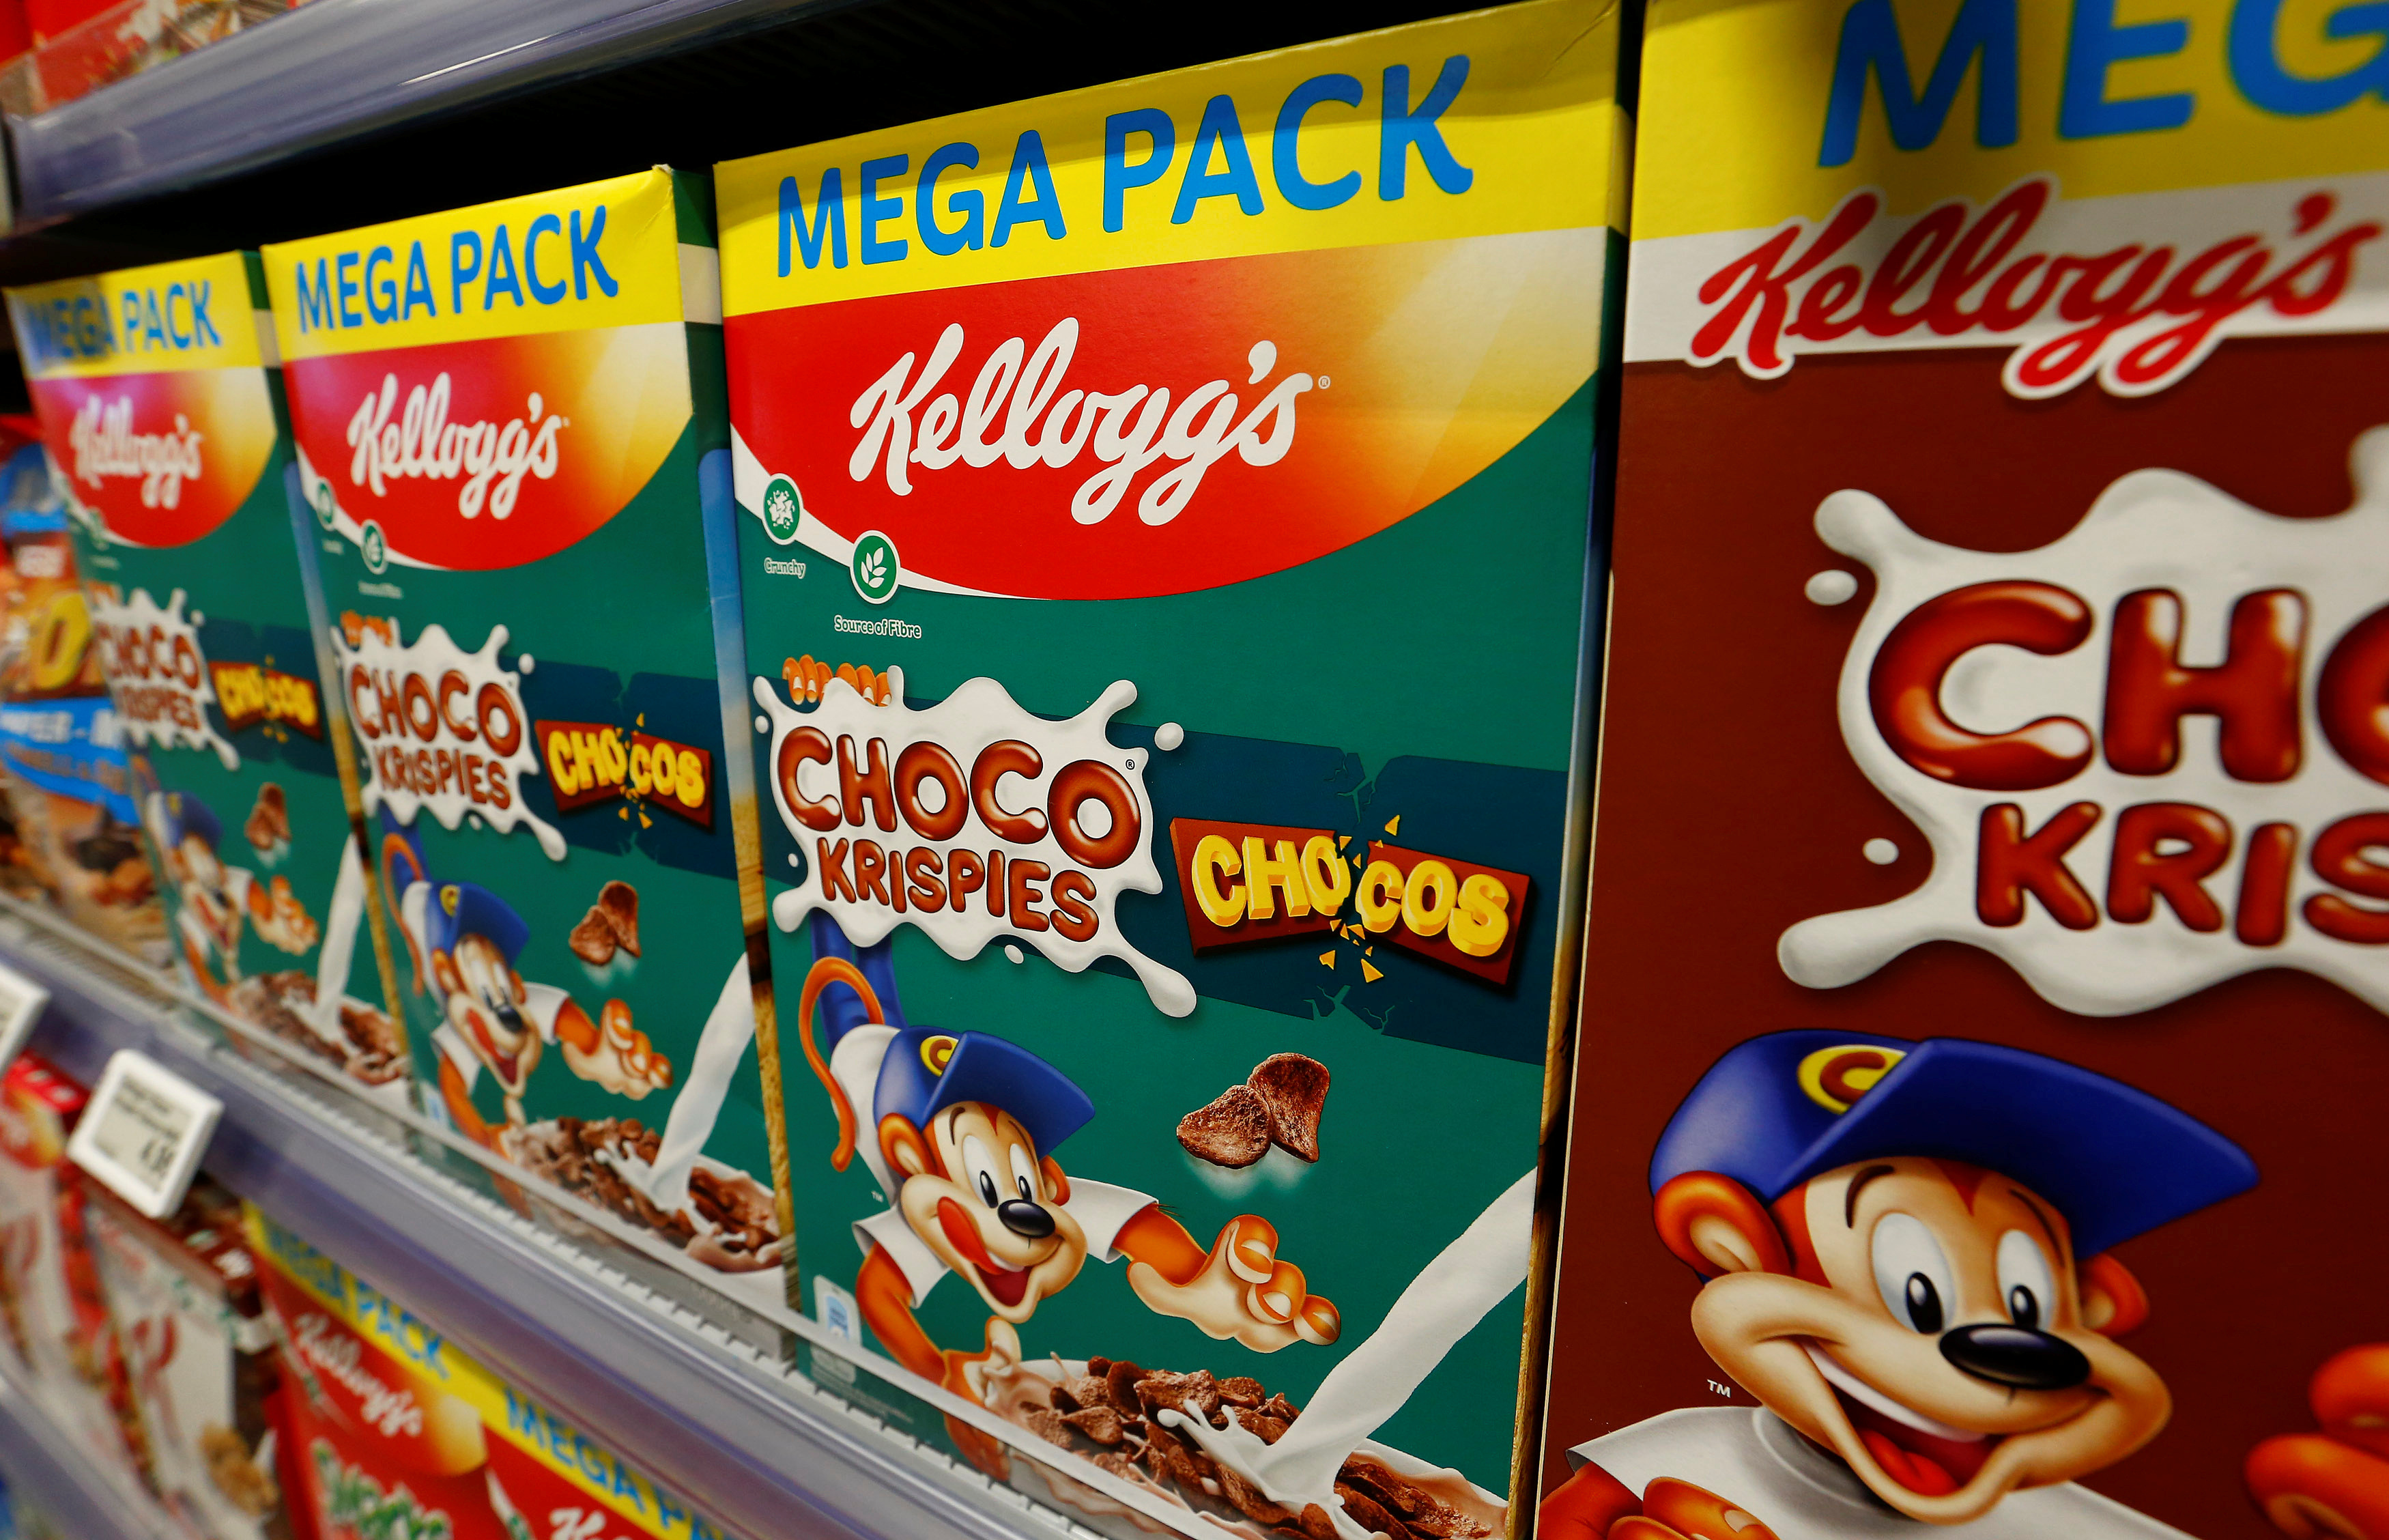 Kellogg's products of U.S. Kellog Company are offered at a supermarket in Zumikon